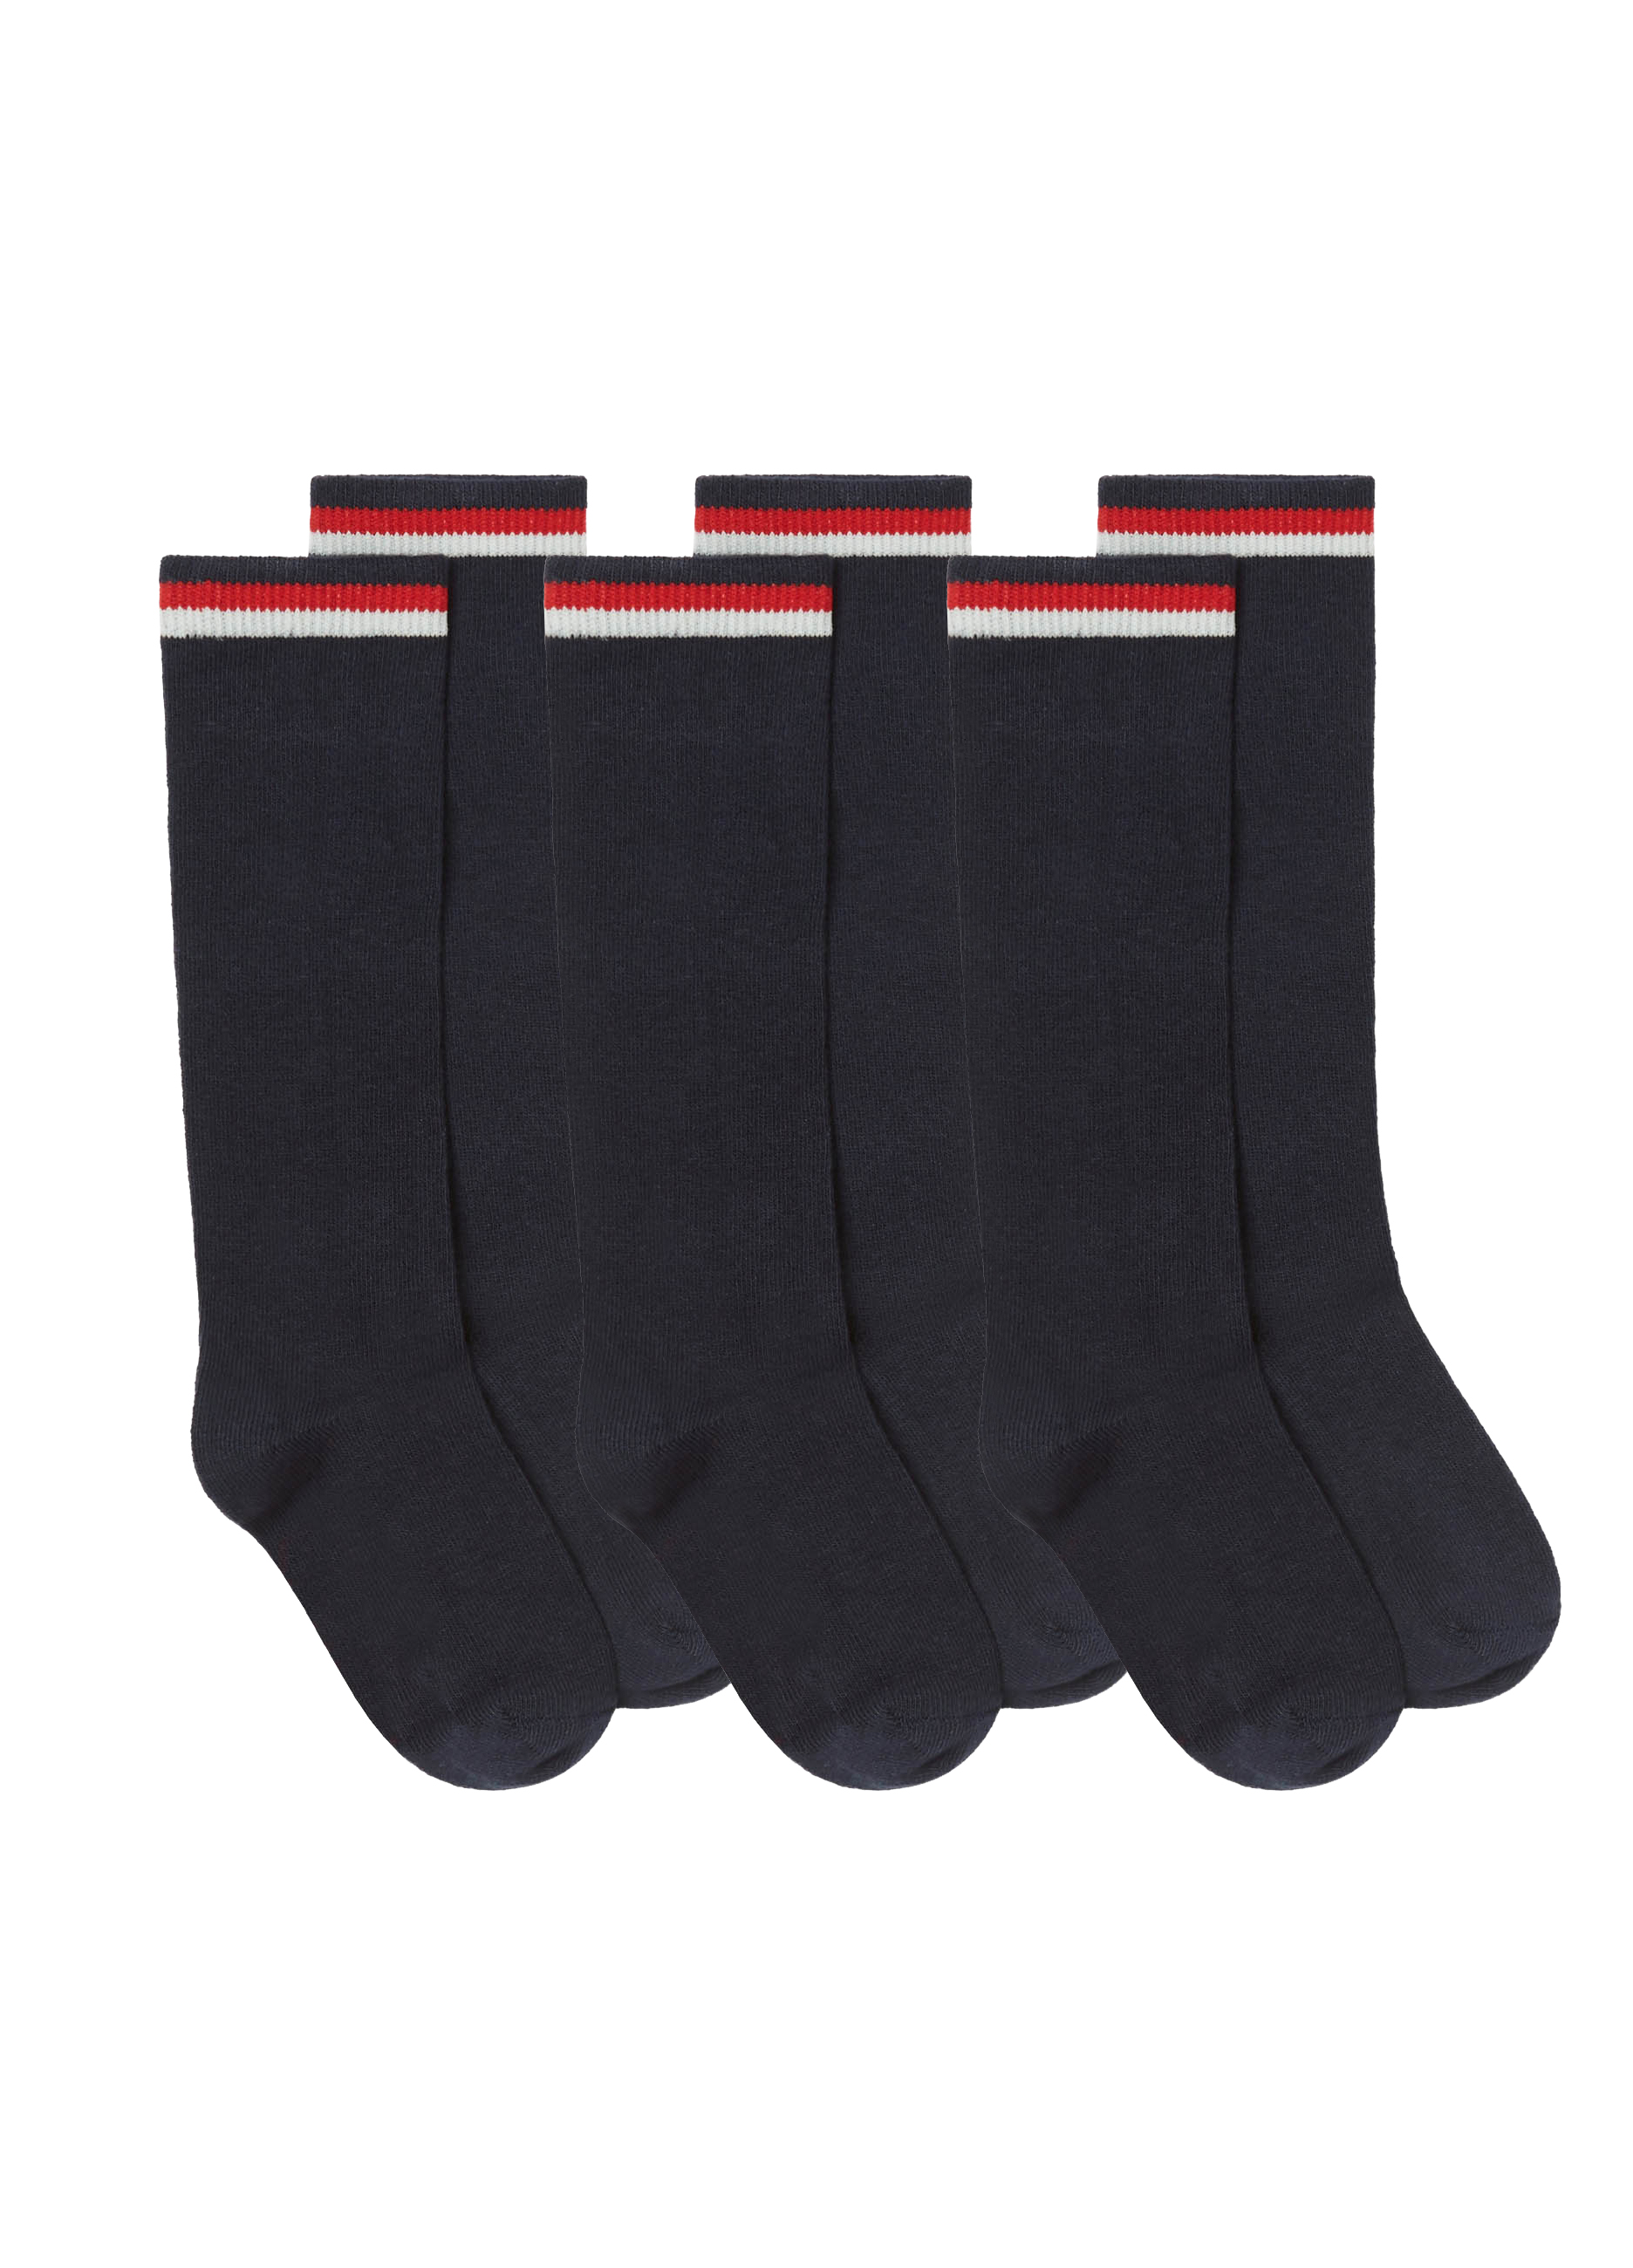 BOY - Long stretch socks with ribbing, 3 pieces pack.